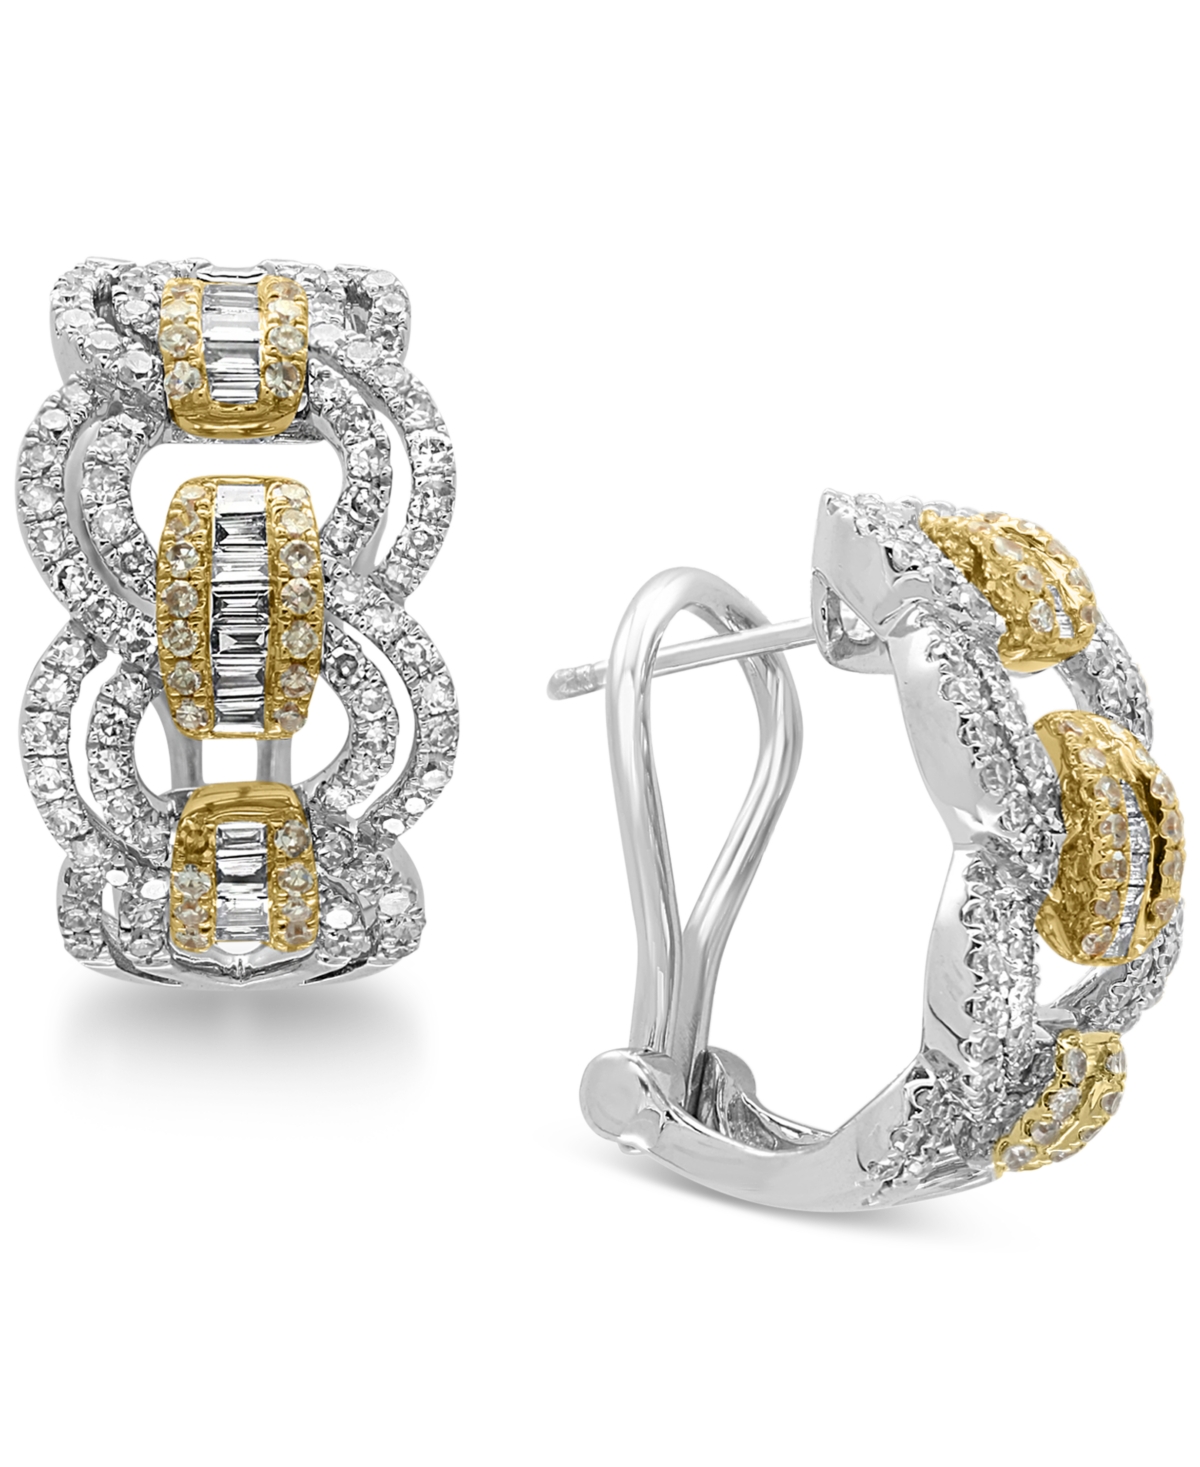 Duo by Effy Diamond Hoop Earrings (1-1/5 ct. t.w.) in 14k Gold and White Gold - Two-Tone